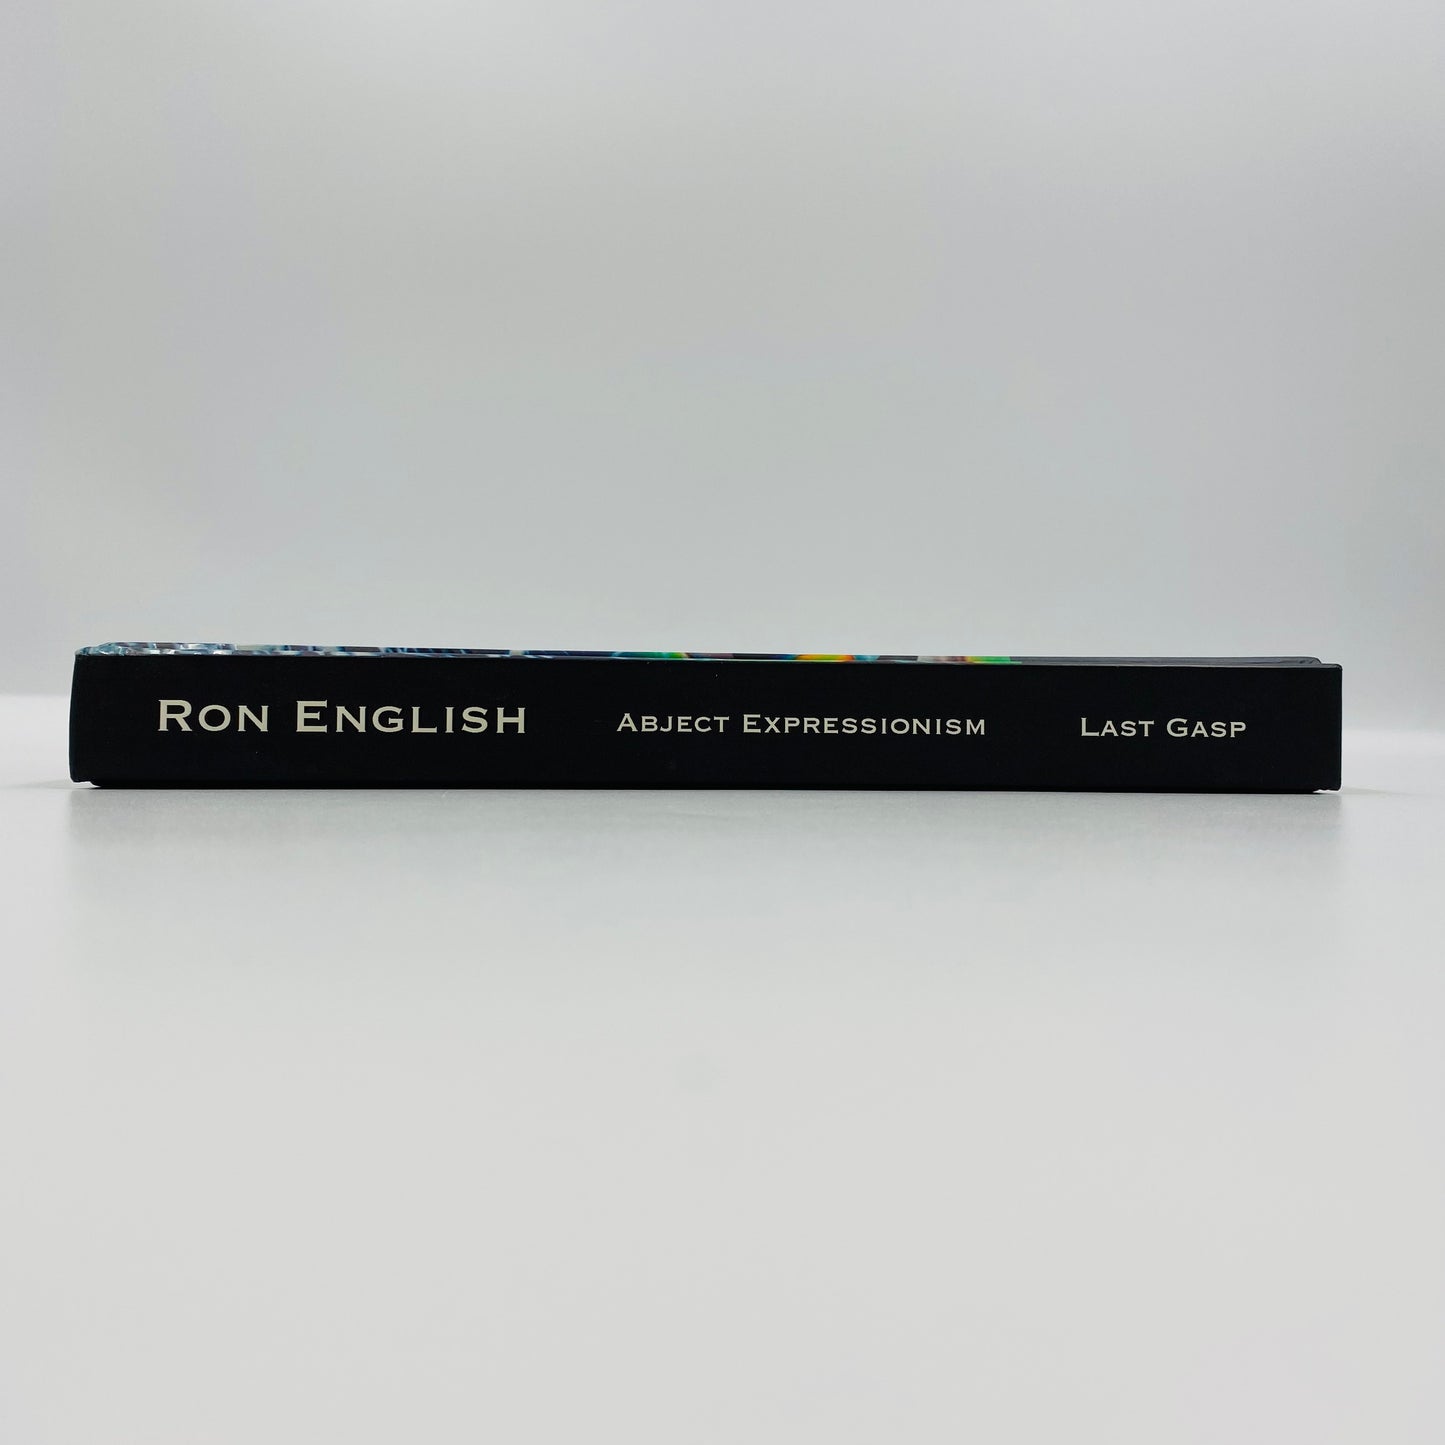 Ron English: Abject Expressionism first printing hardcover (2007) Last Gasp